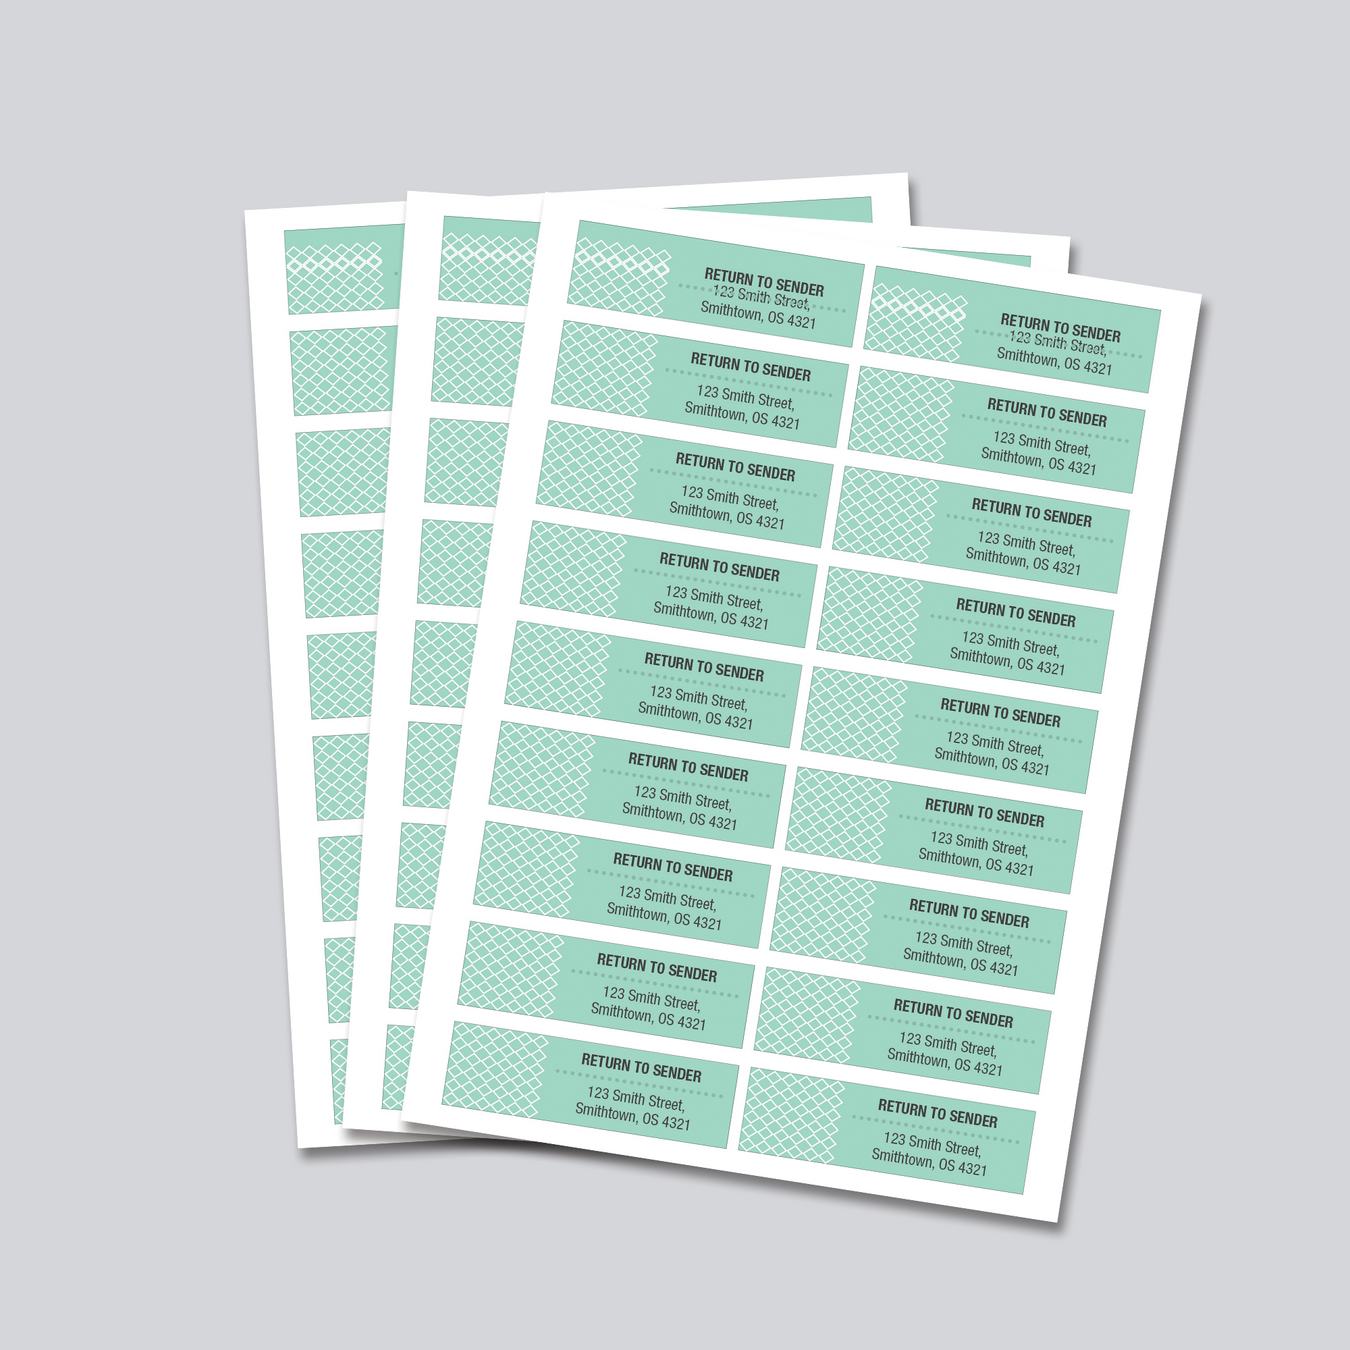 Sheet Labels docuprint printing and design fremantle perth fast high-quality